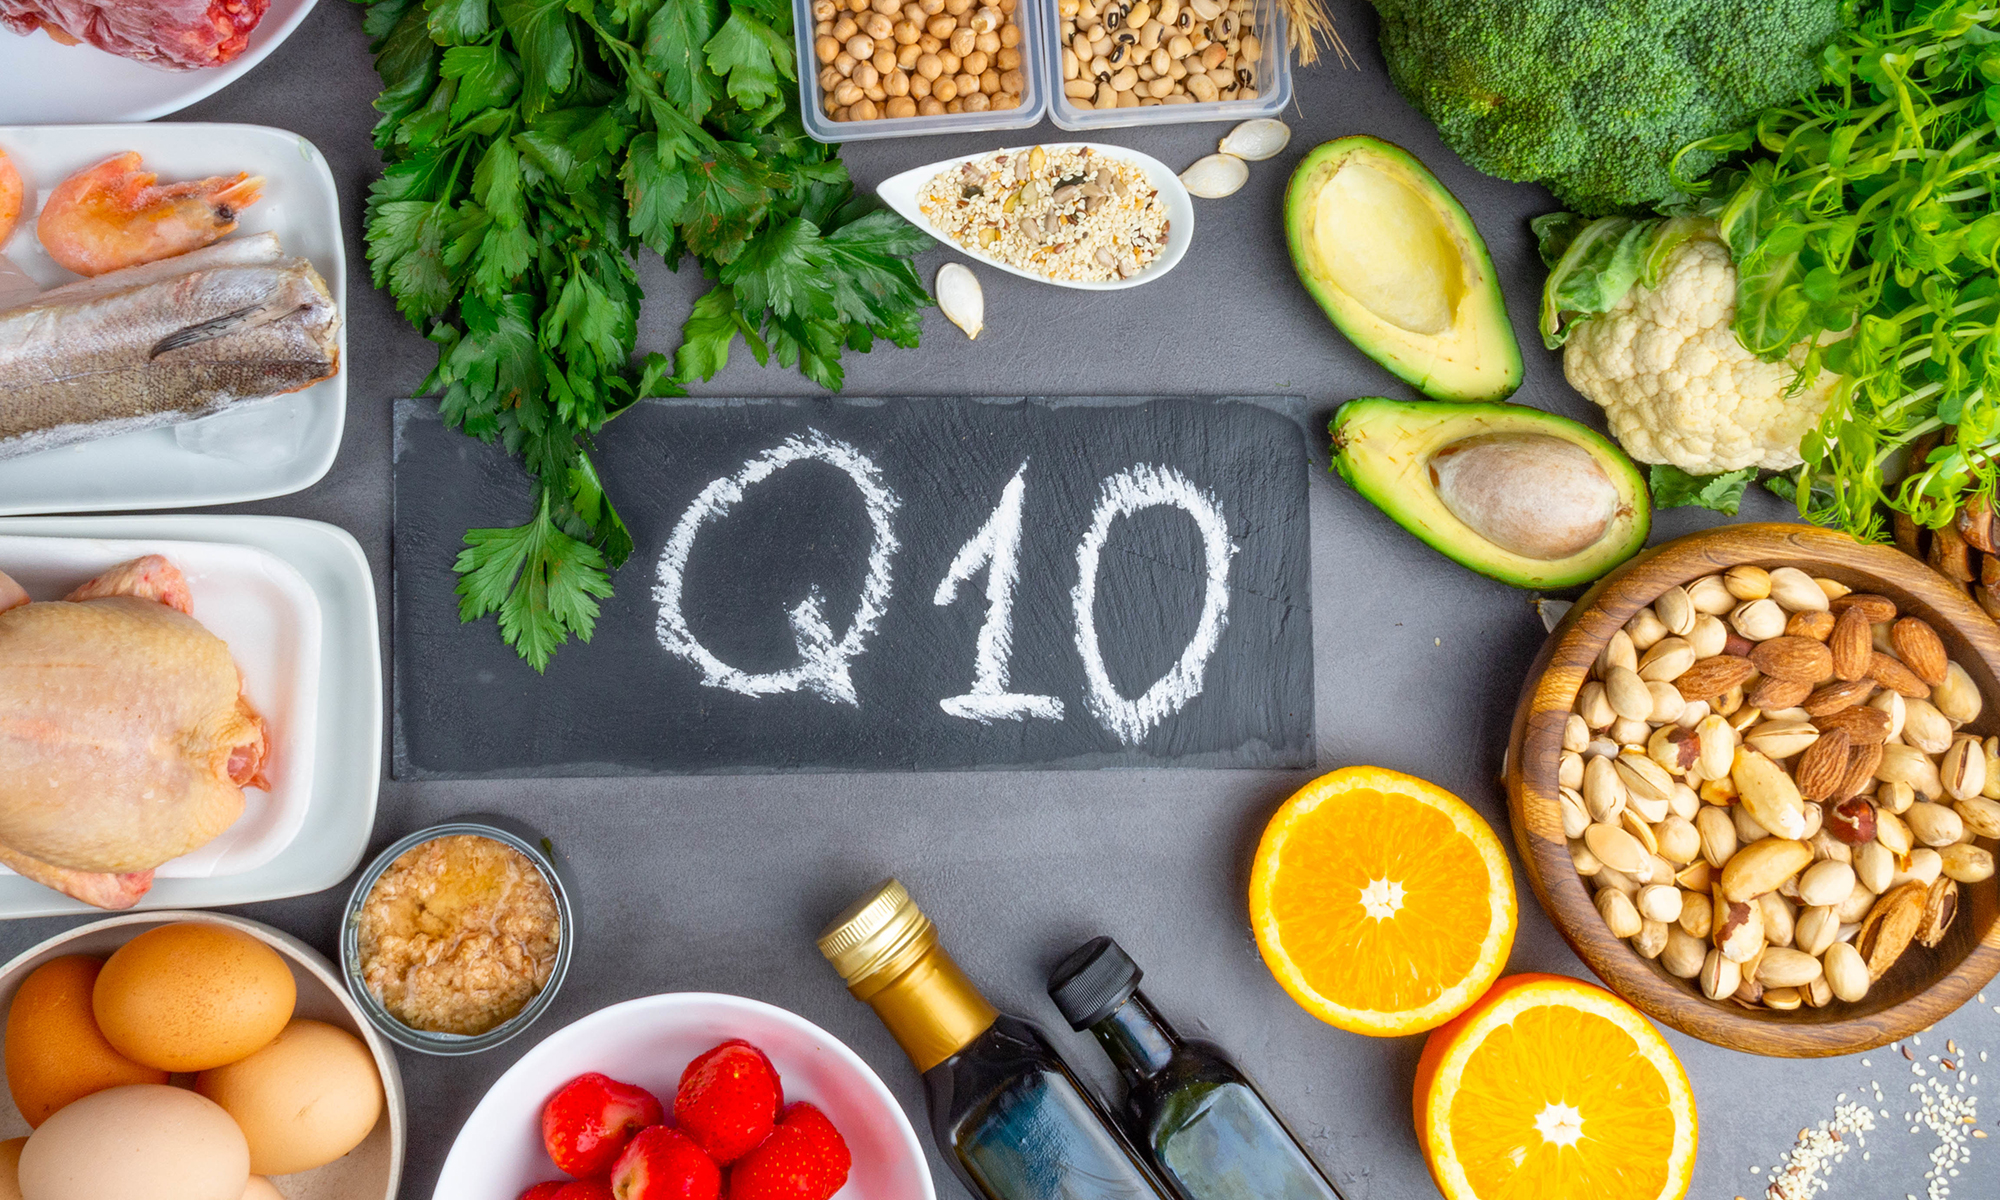 Coq10 Benefits: Energize Your Heart and Brain at the Same Time